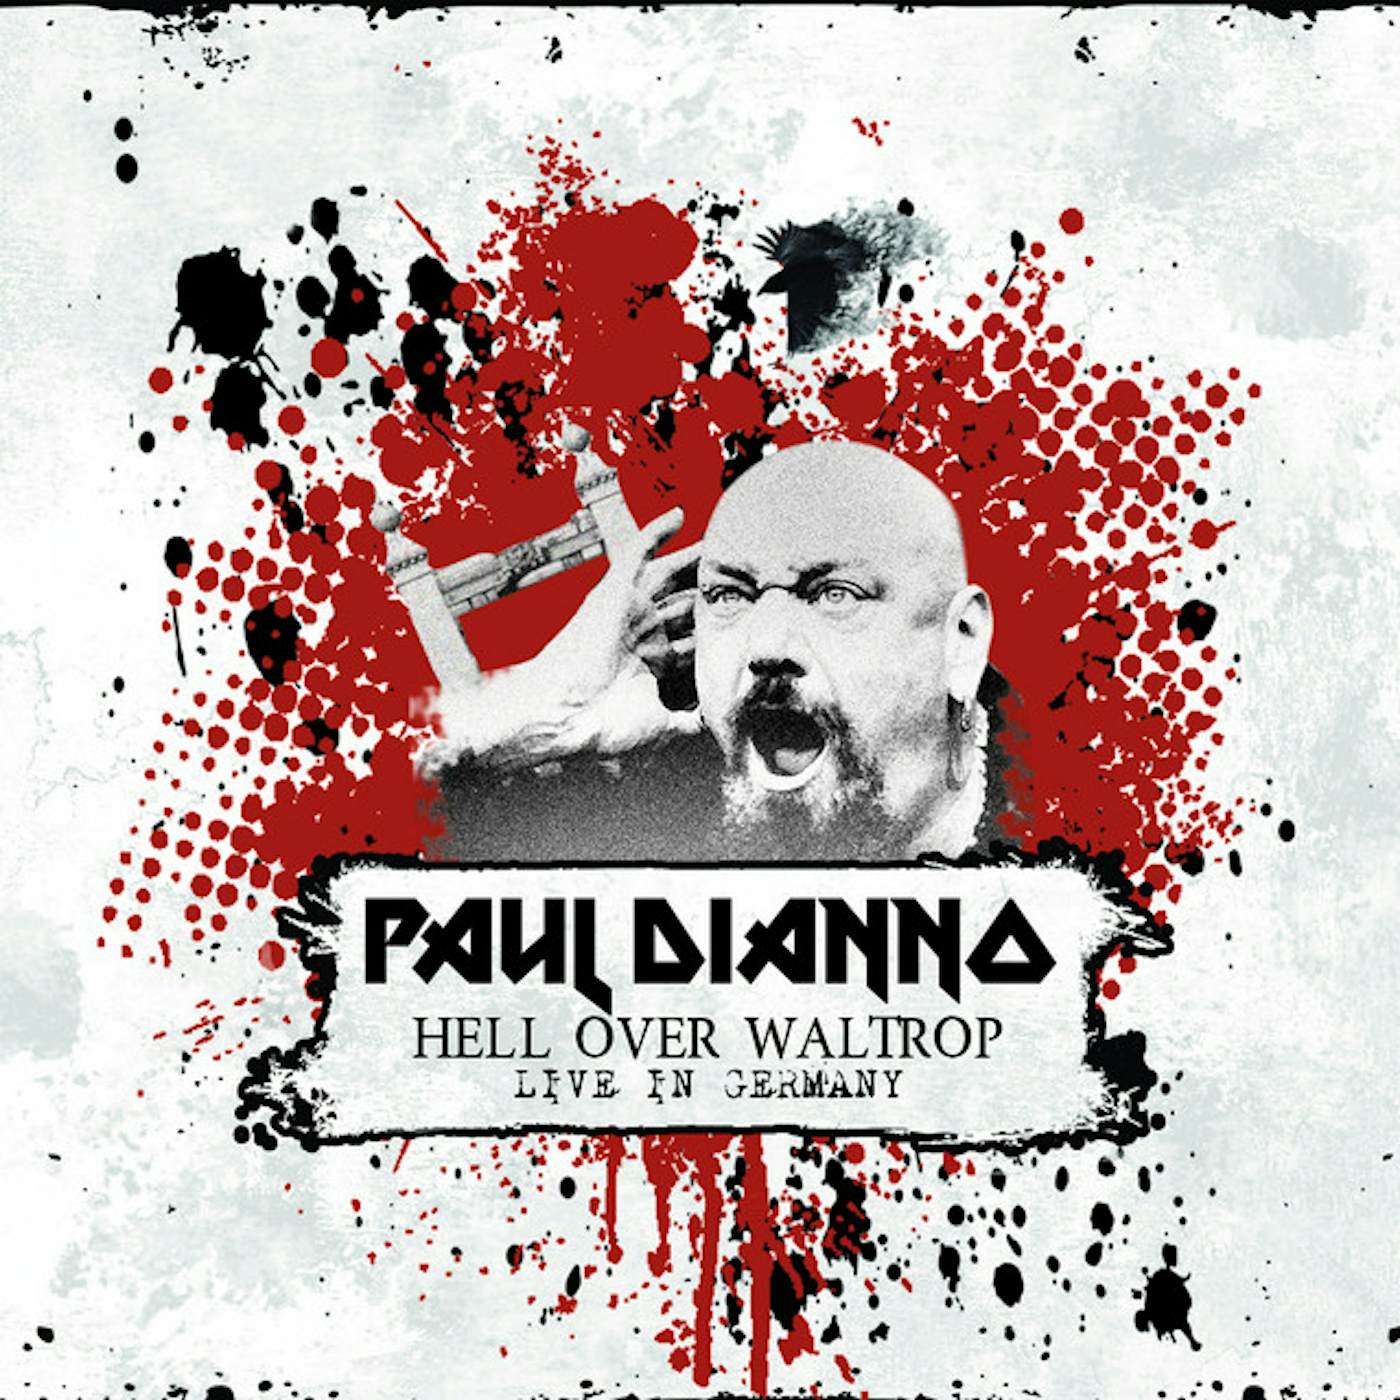 Paul Di'Anno HELL OVER WALTROP - LIVE IN GERMANY CD